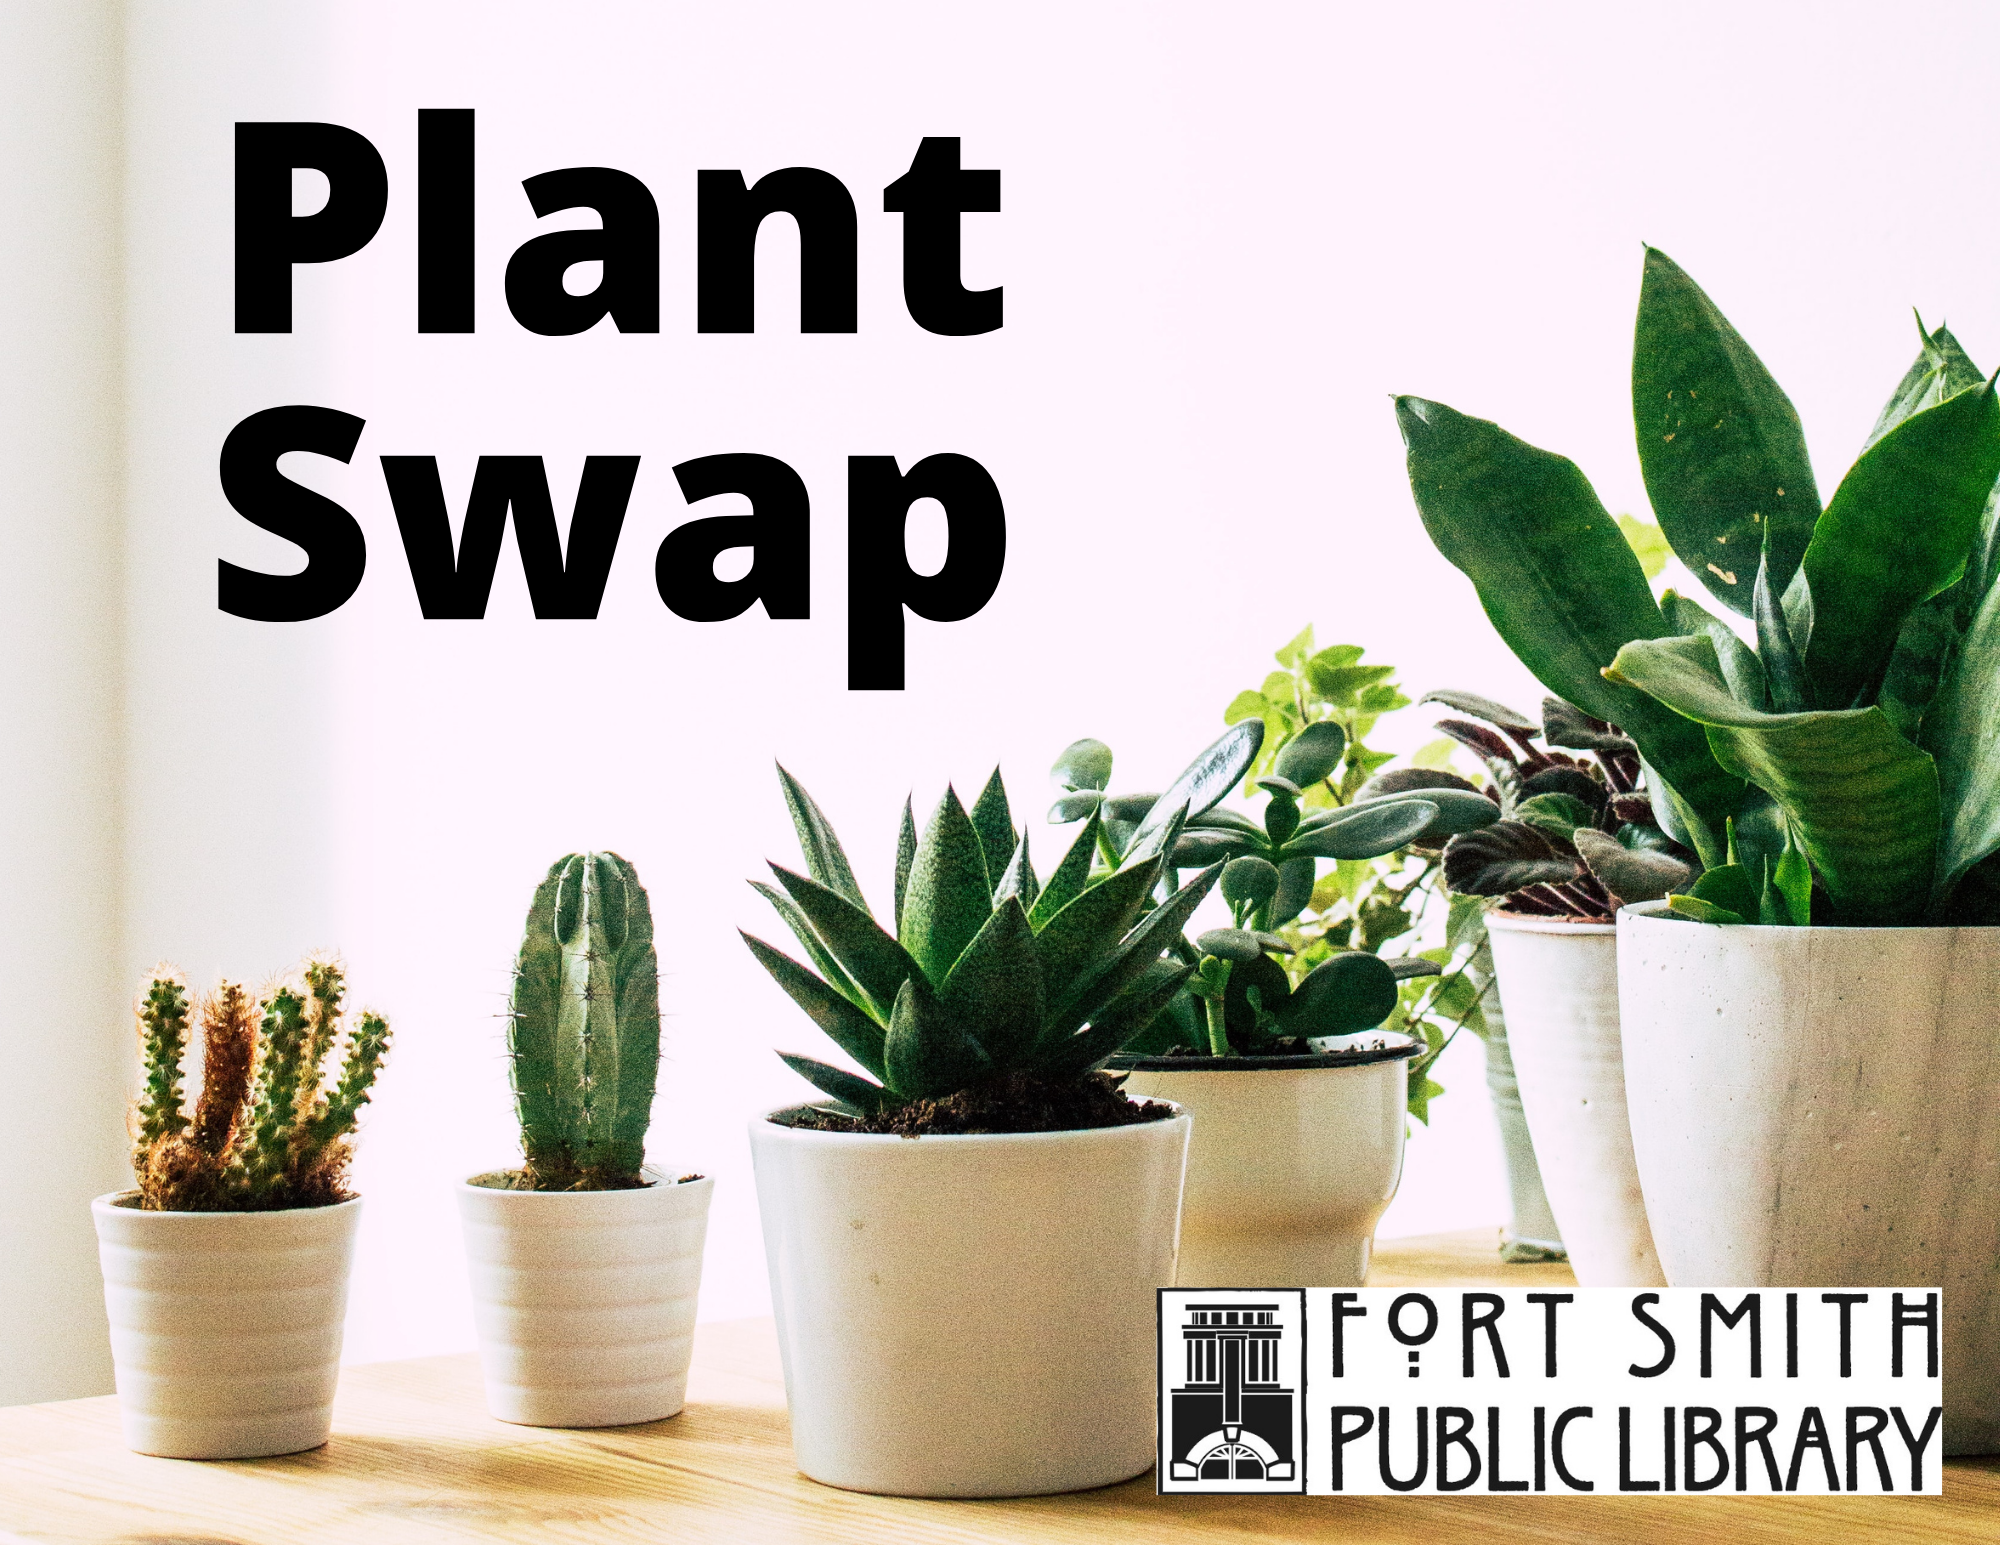 Plant Swap in black letters against a off white background. Various plants in white pots in various positions are right under the Plant Swap wording. 